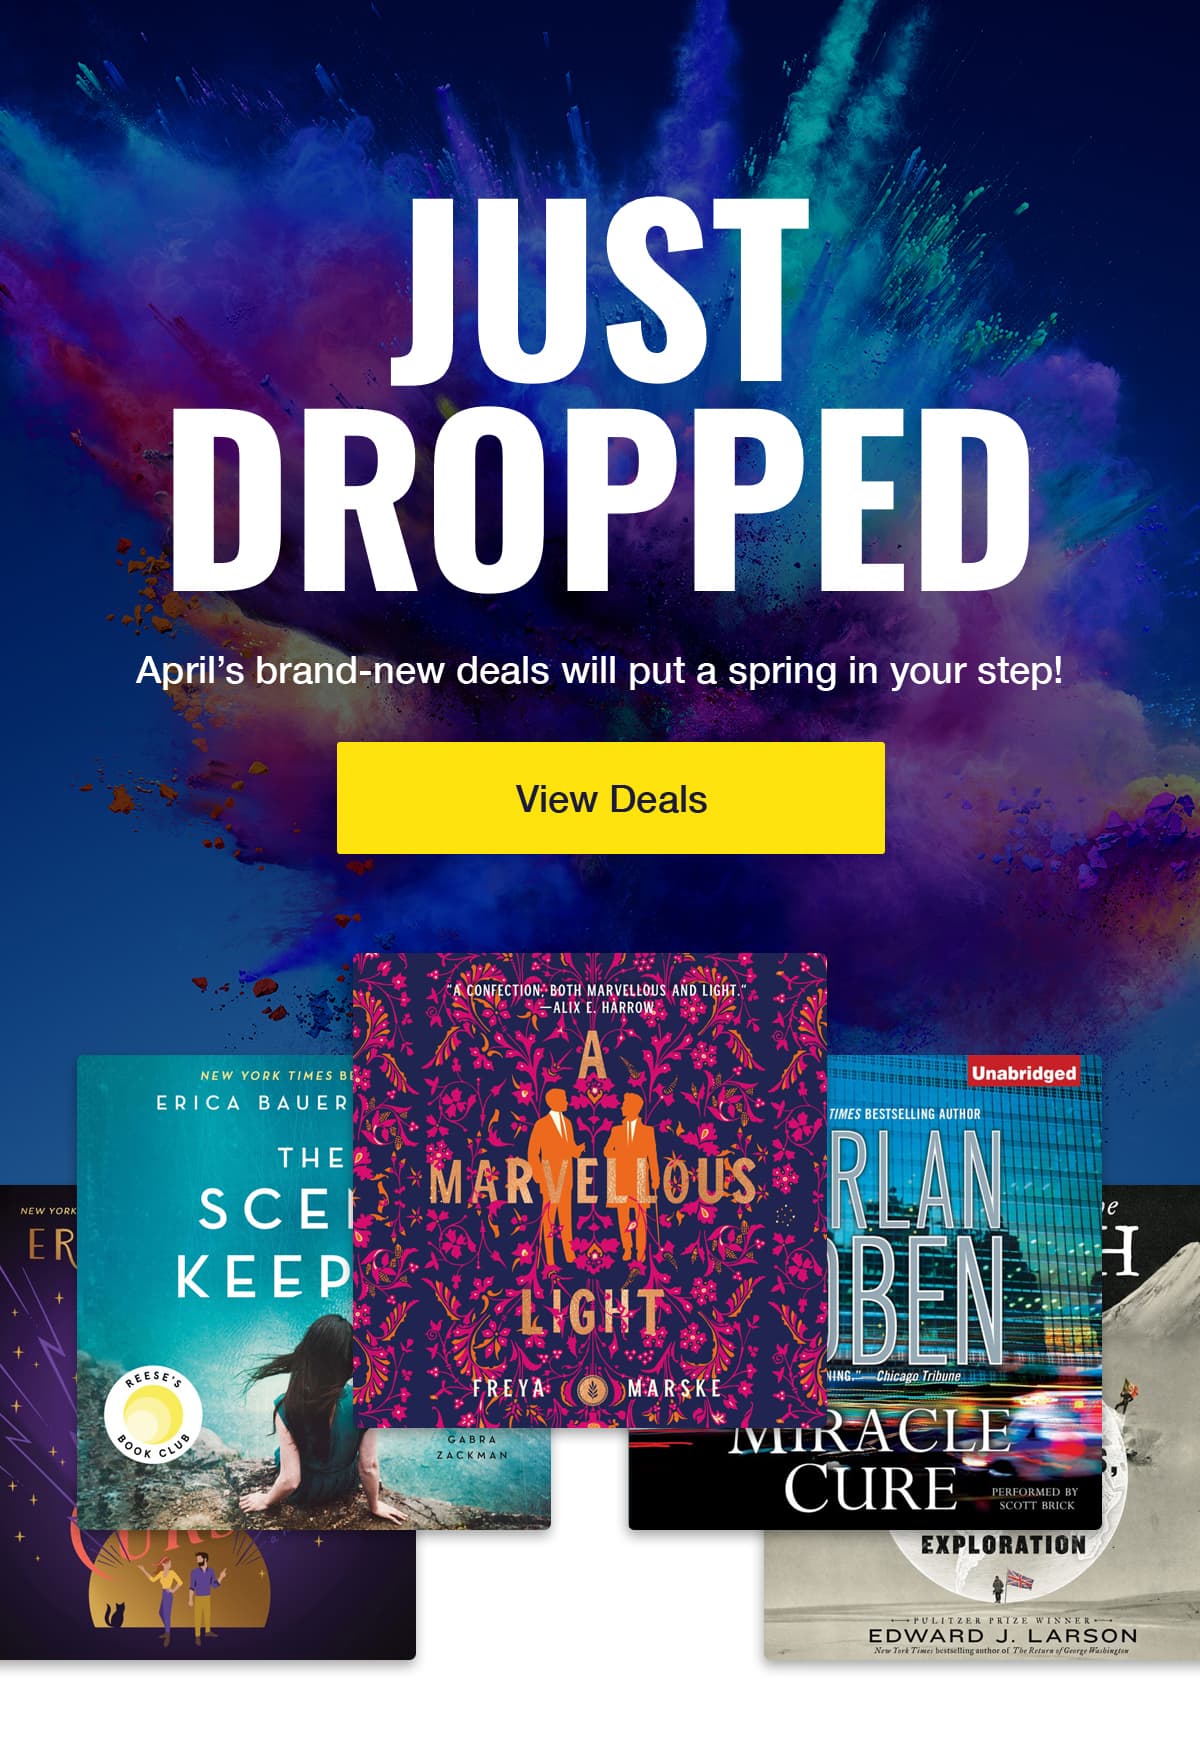 Just Dropped April's brand-new deals will put a spring in your step!